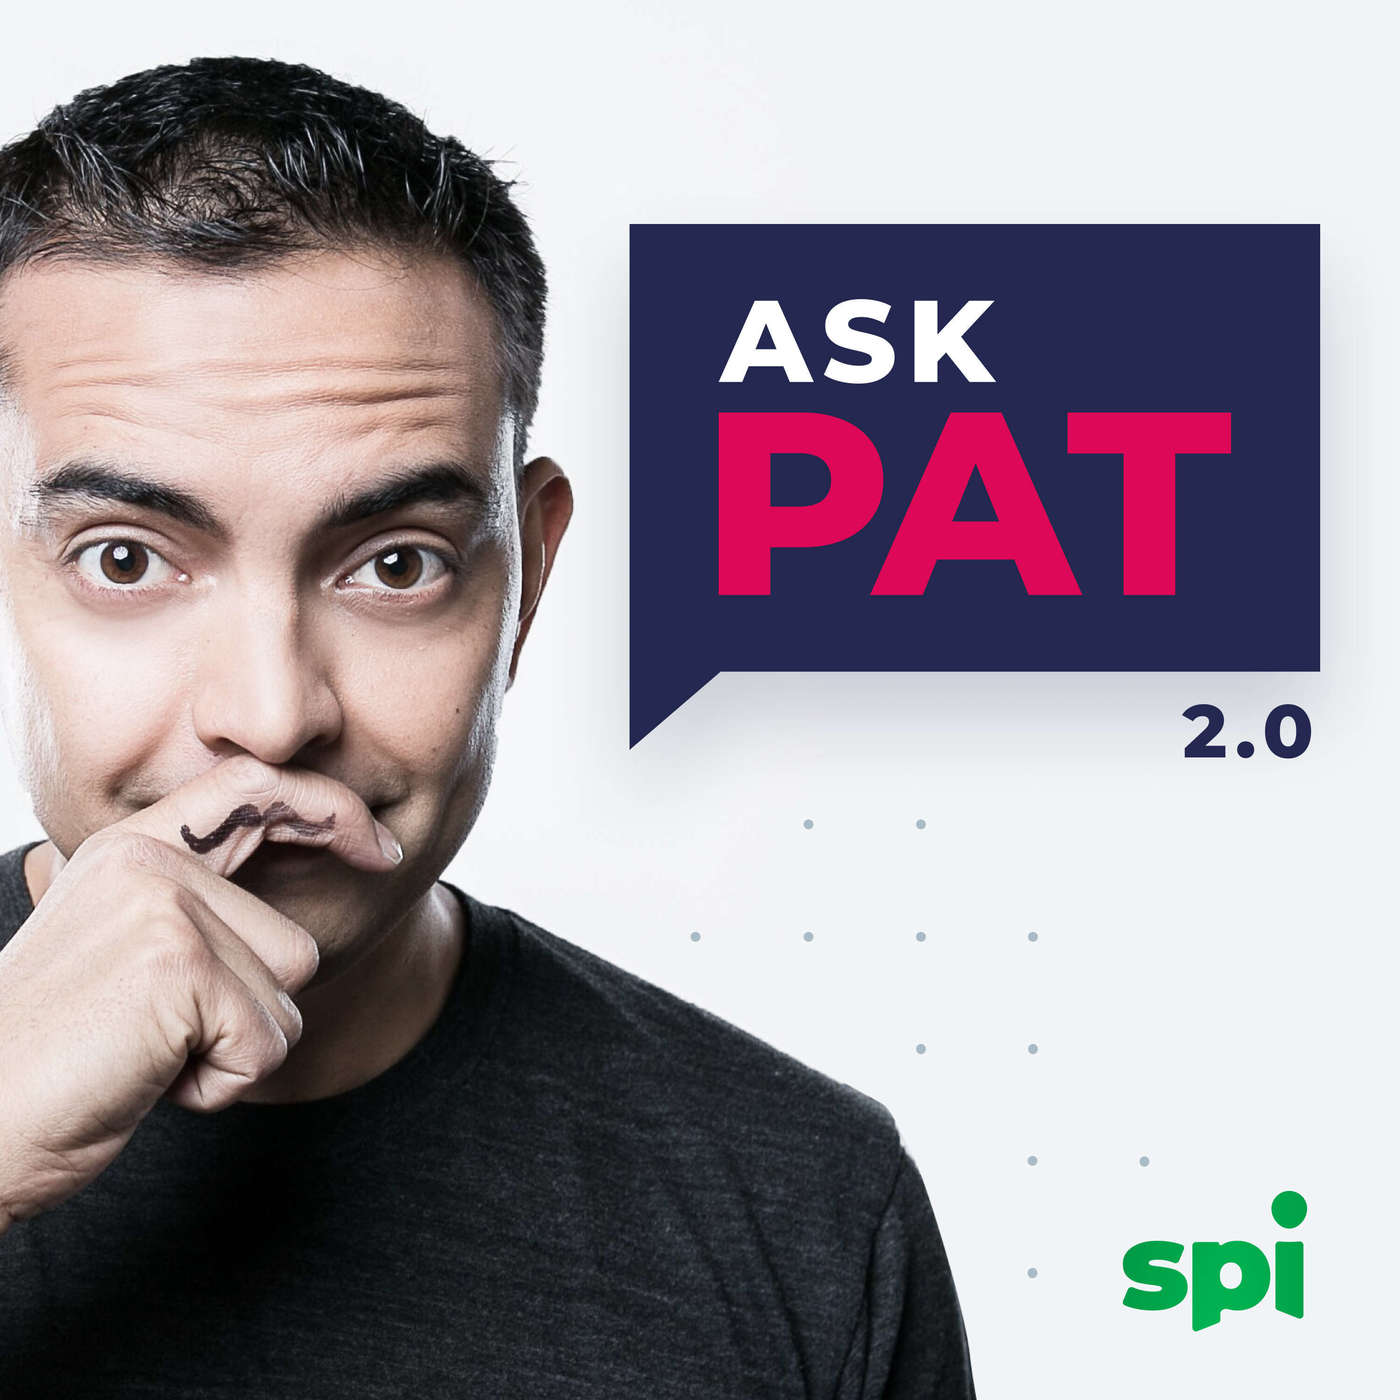 AskPat 2.0: A Weekly Coaching Call on Online Business, Blogging, Marketing, and Lifestyle Design